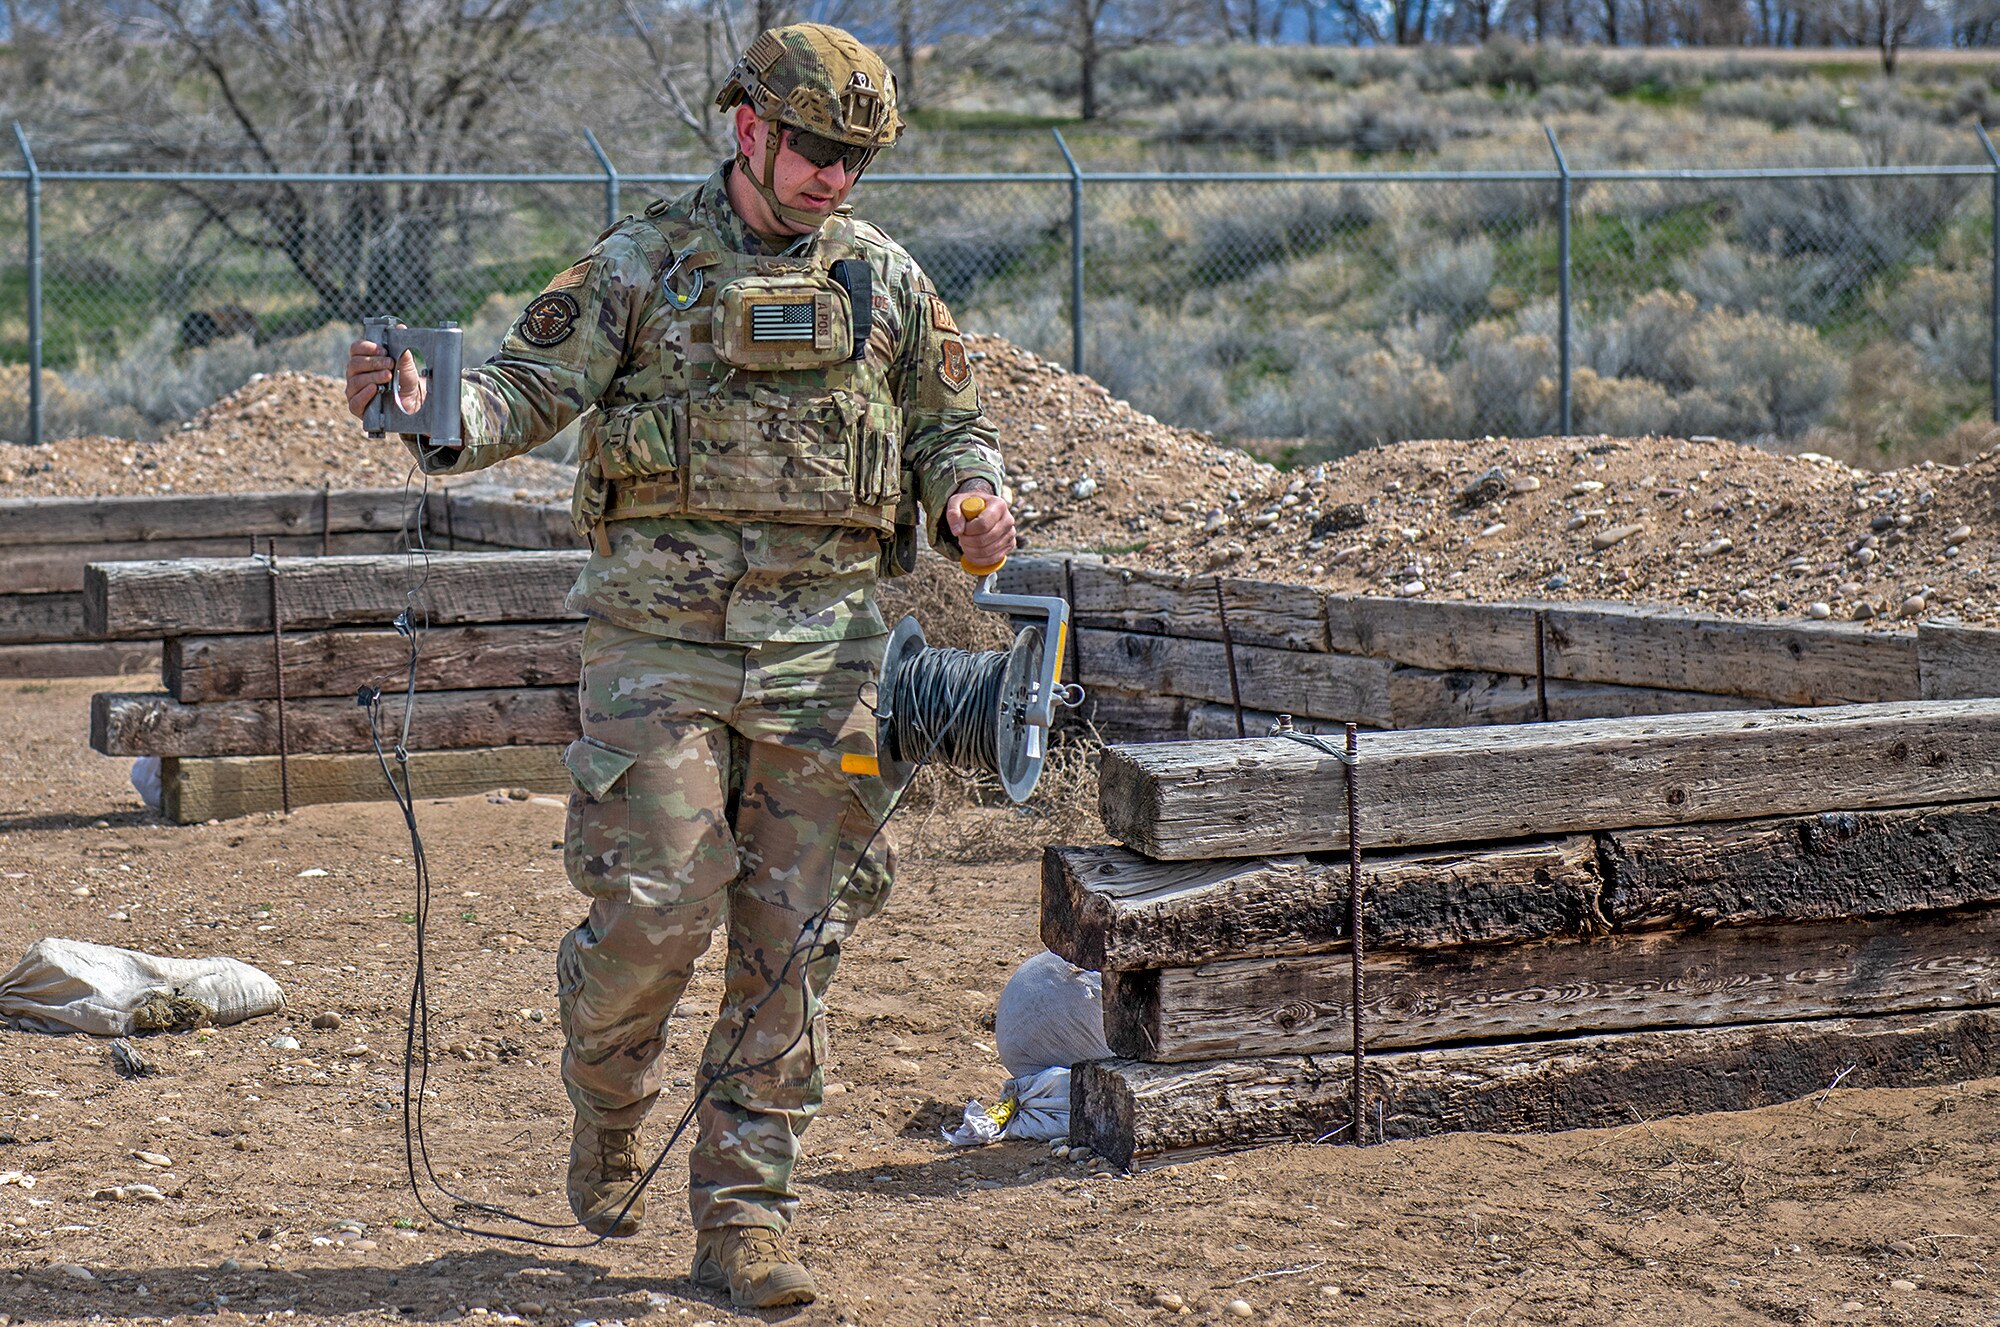 Staff Sgt. Austin Kener, Explosive Ordnance Disposal Technician with the 419th EOD Flight, prepares to remove an inert fuse